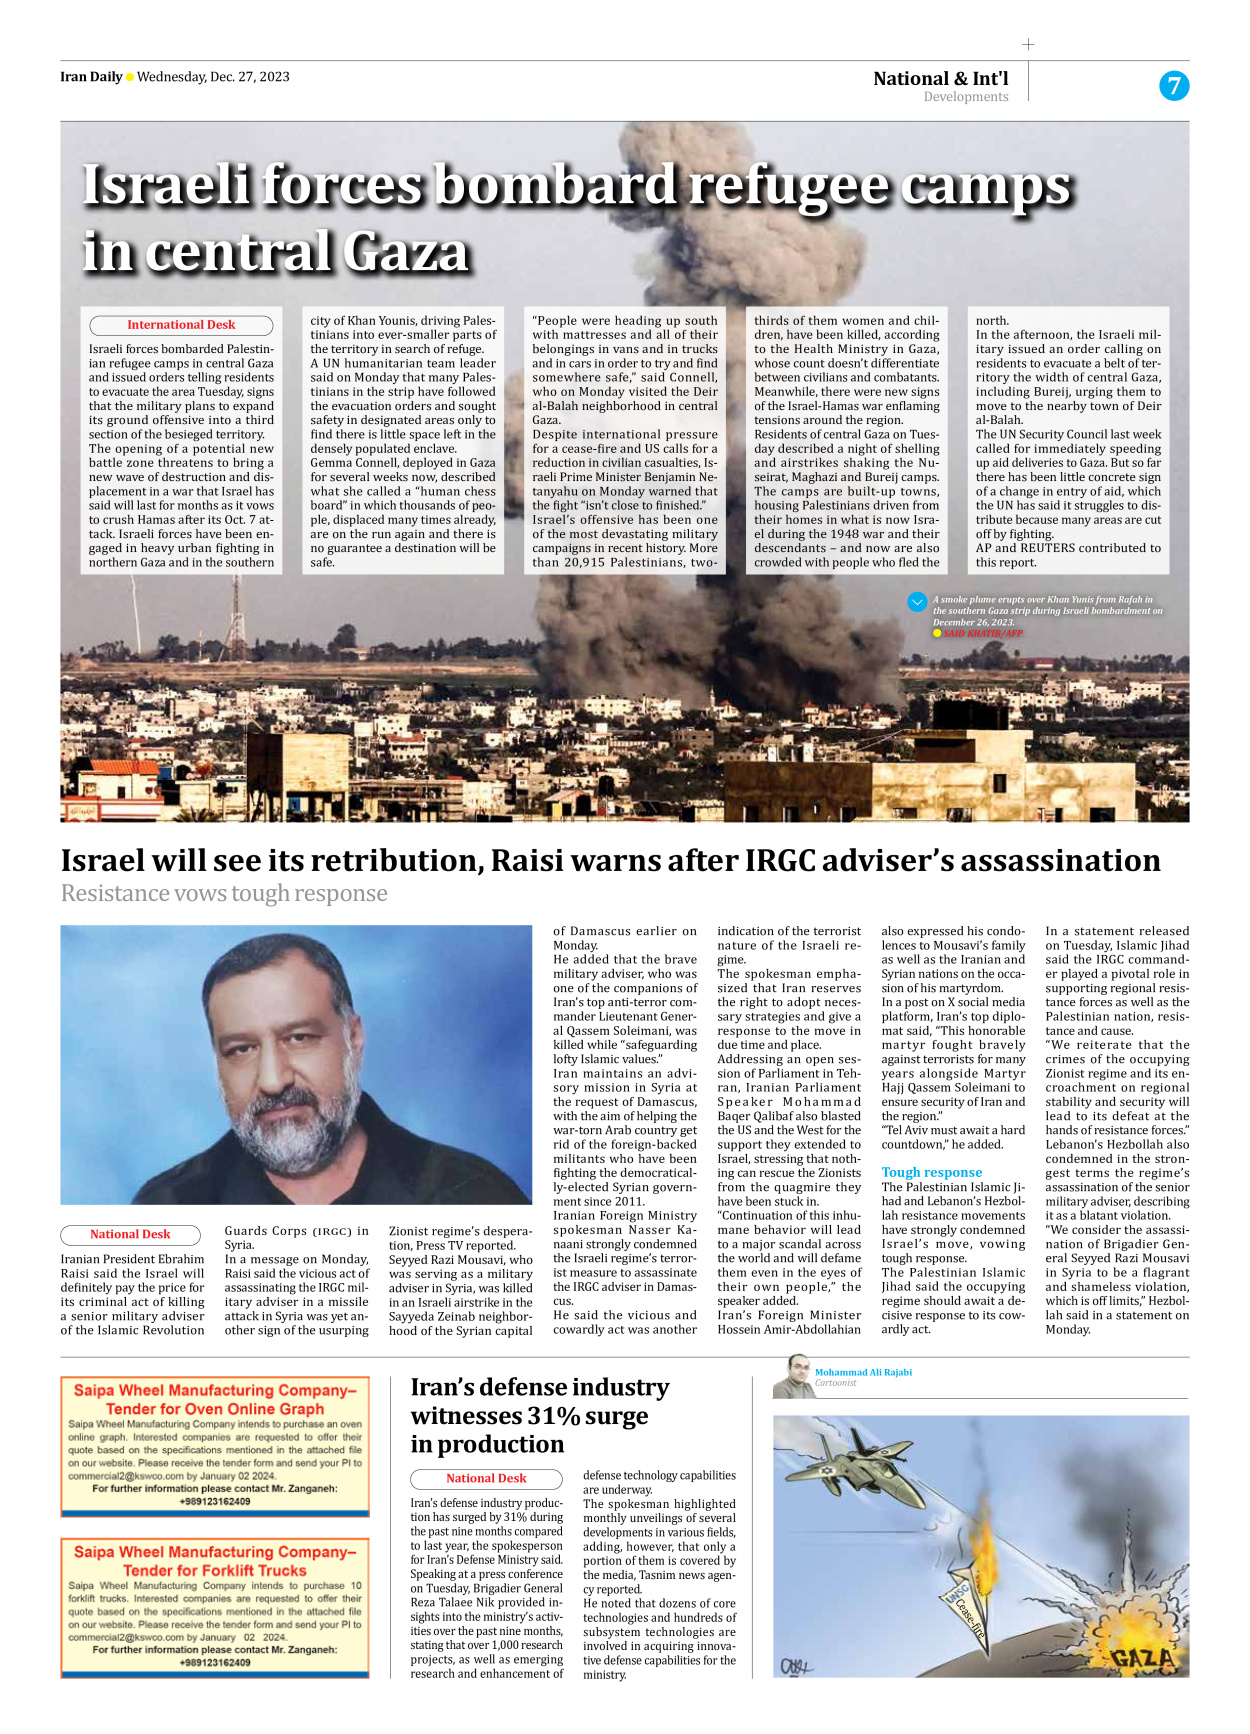 Iran Daily - Number Seven Thousand Four Hundred and Sixty Nine - 27 December 2023 - Page 7